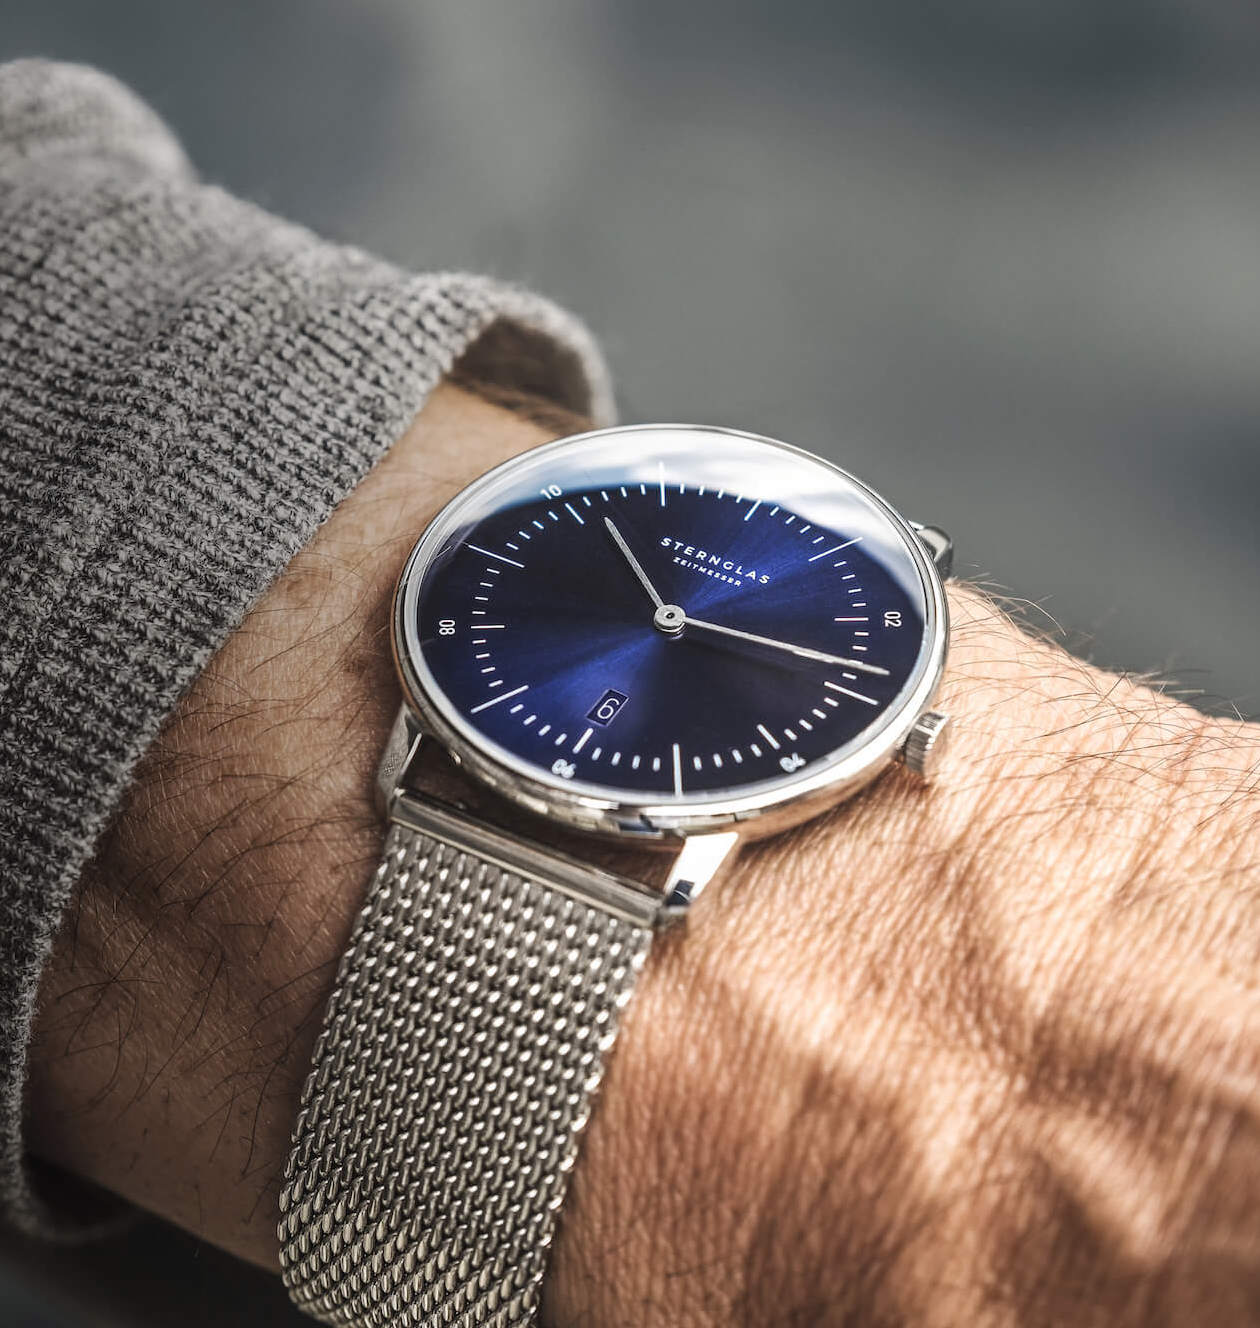 popup|Timelessly elegant metal strap in Milanese style|The Milanese strap made of stainless steel complements the colored dial. It fits wonderfully around your wrist and can be adjusted to your desired length.